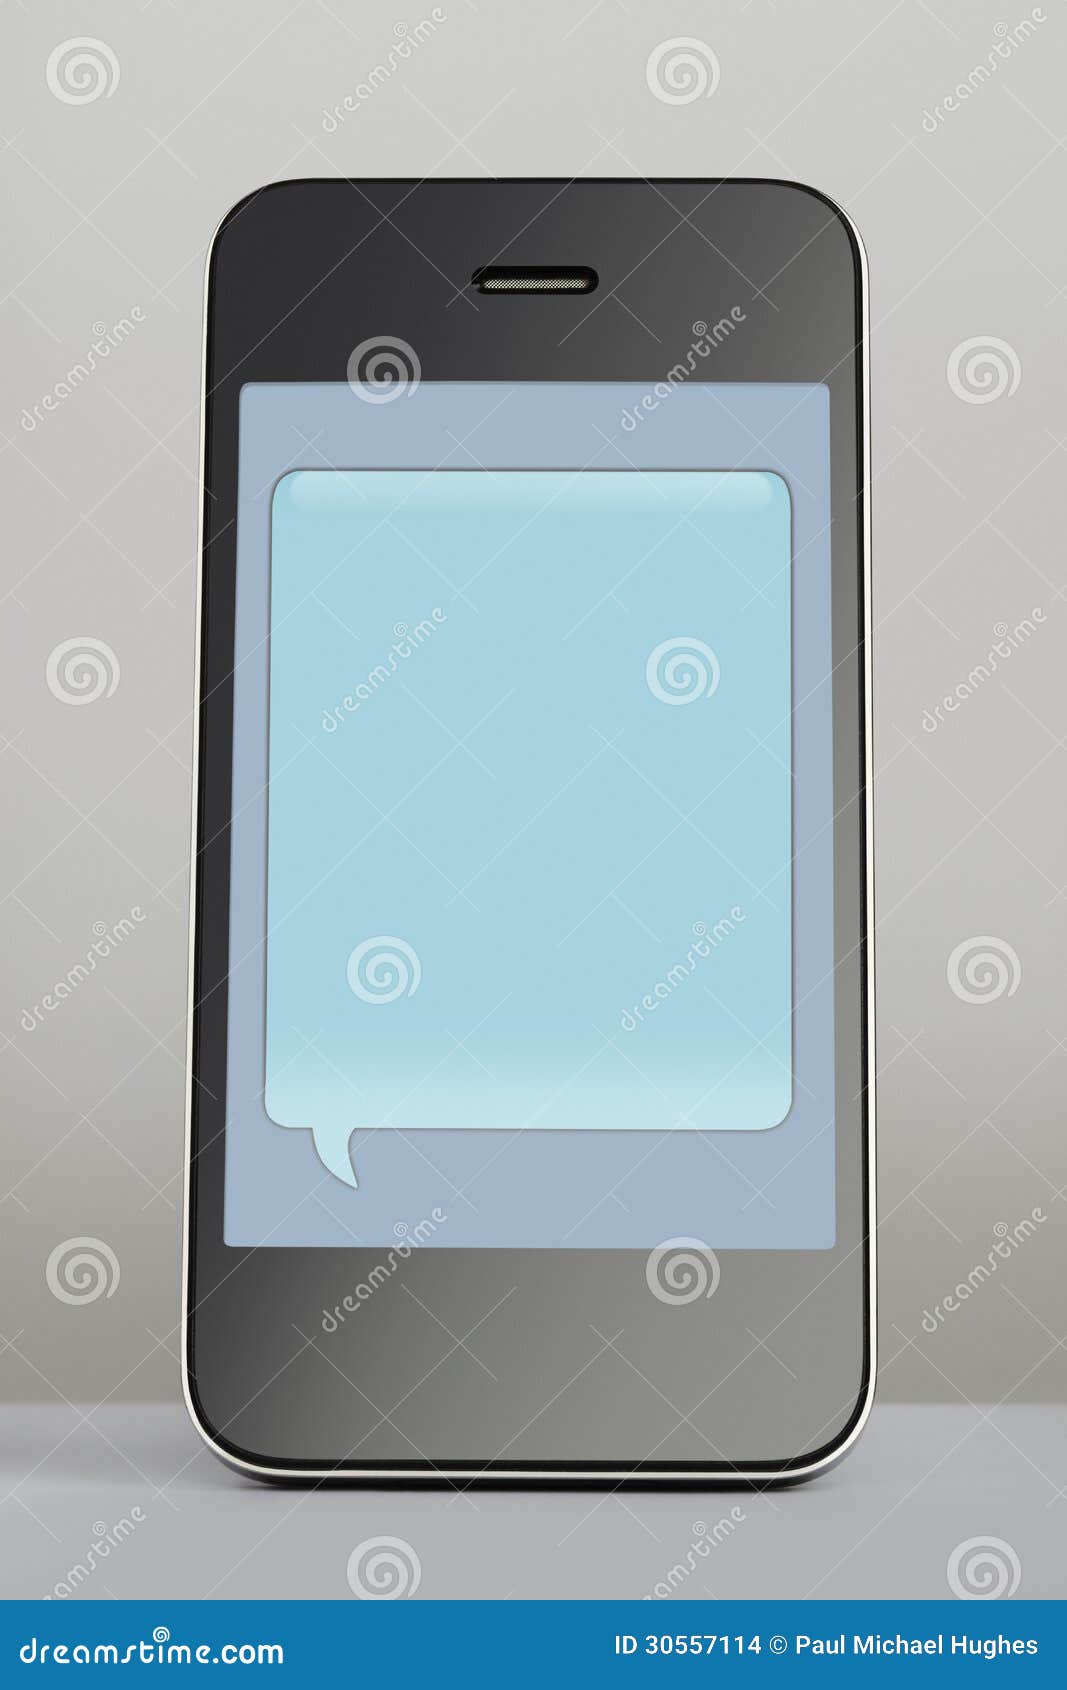 mobile phone with text message speech bubble